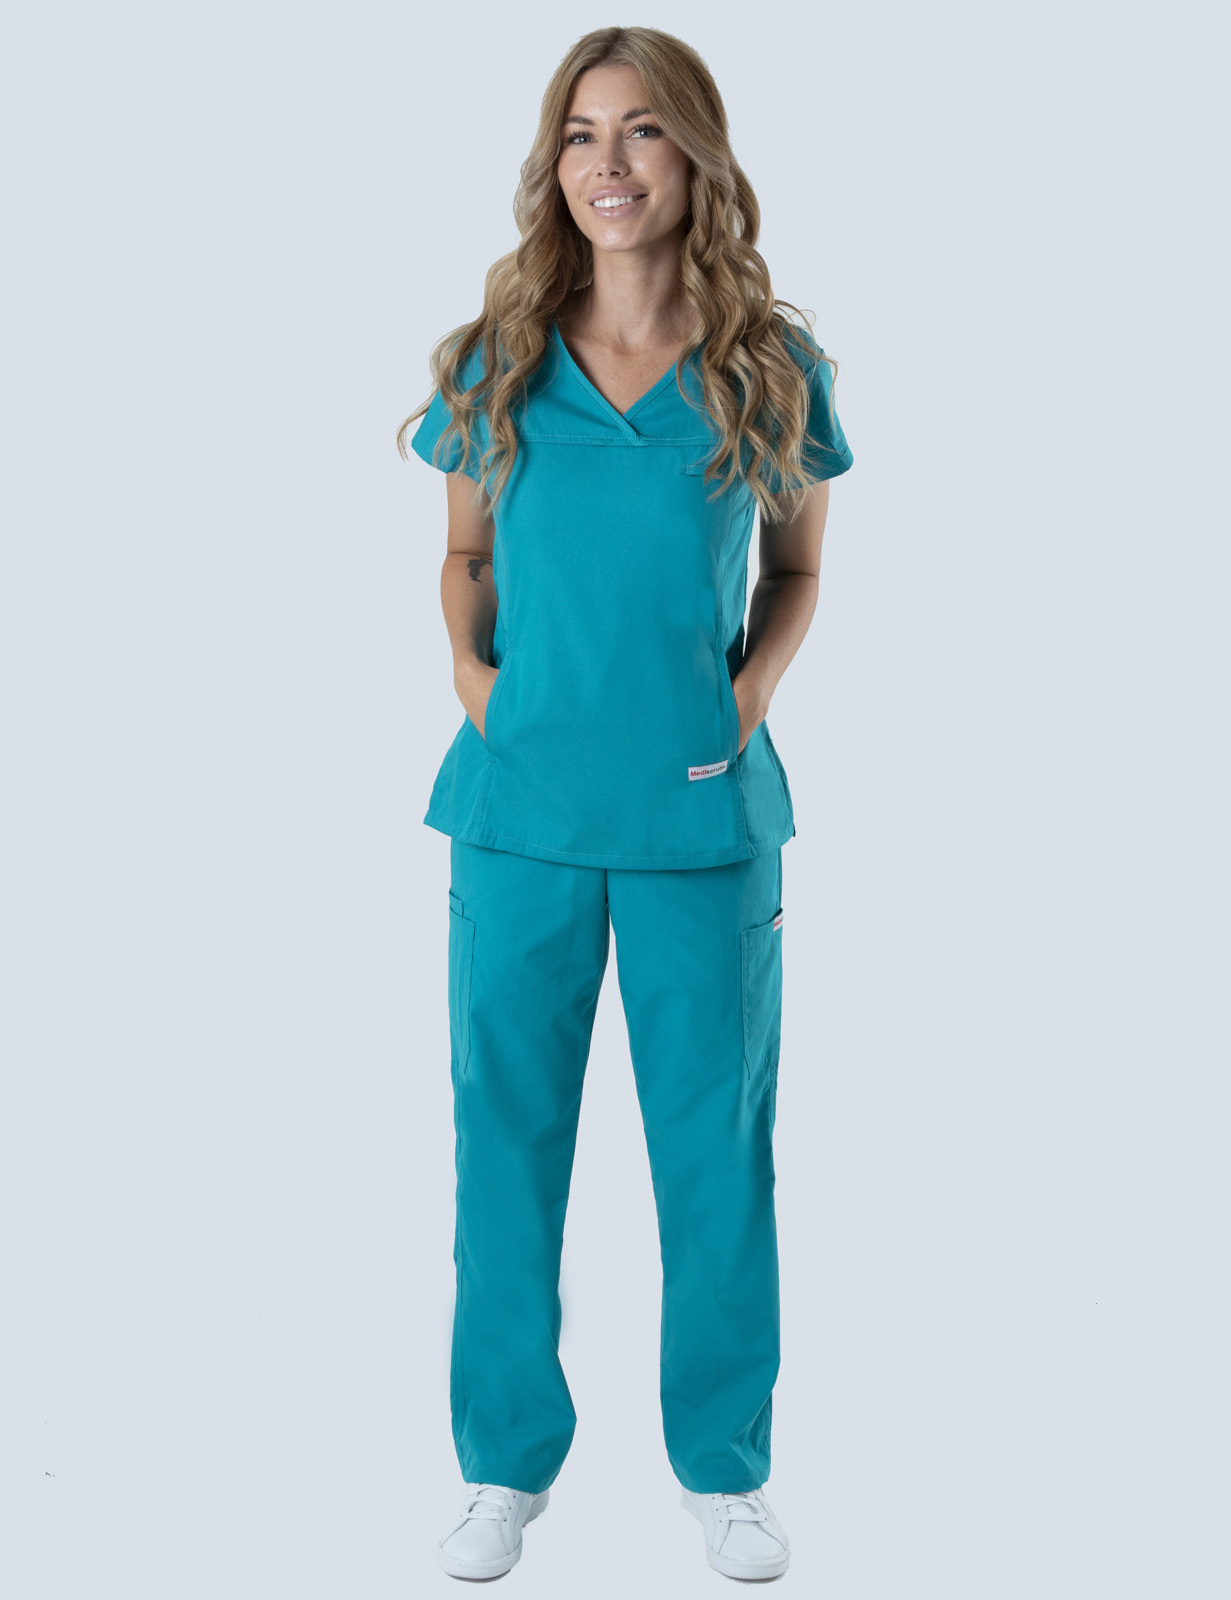 Redland Hospital - Emergency Department (Women's Fit Solid Scrub Top and Cargo Pants in Teal incl Logos)